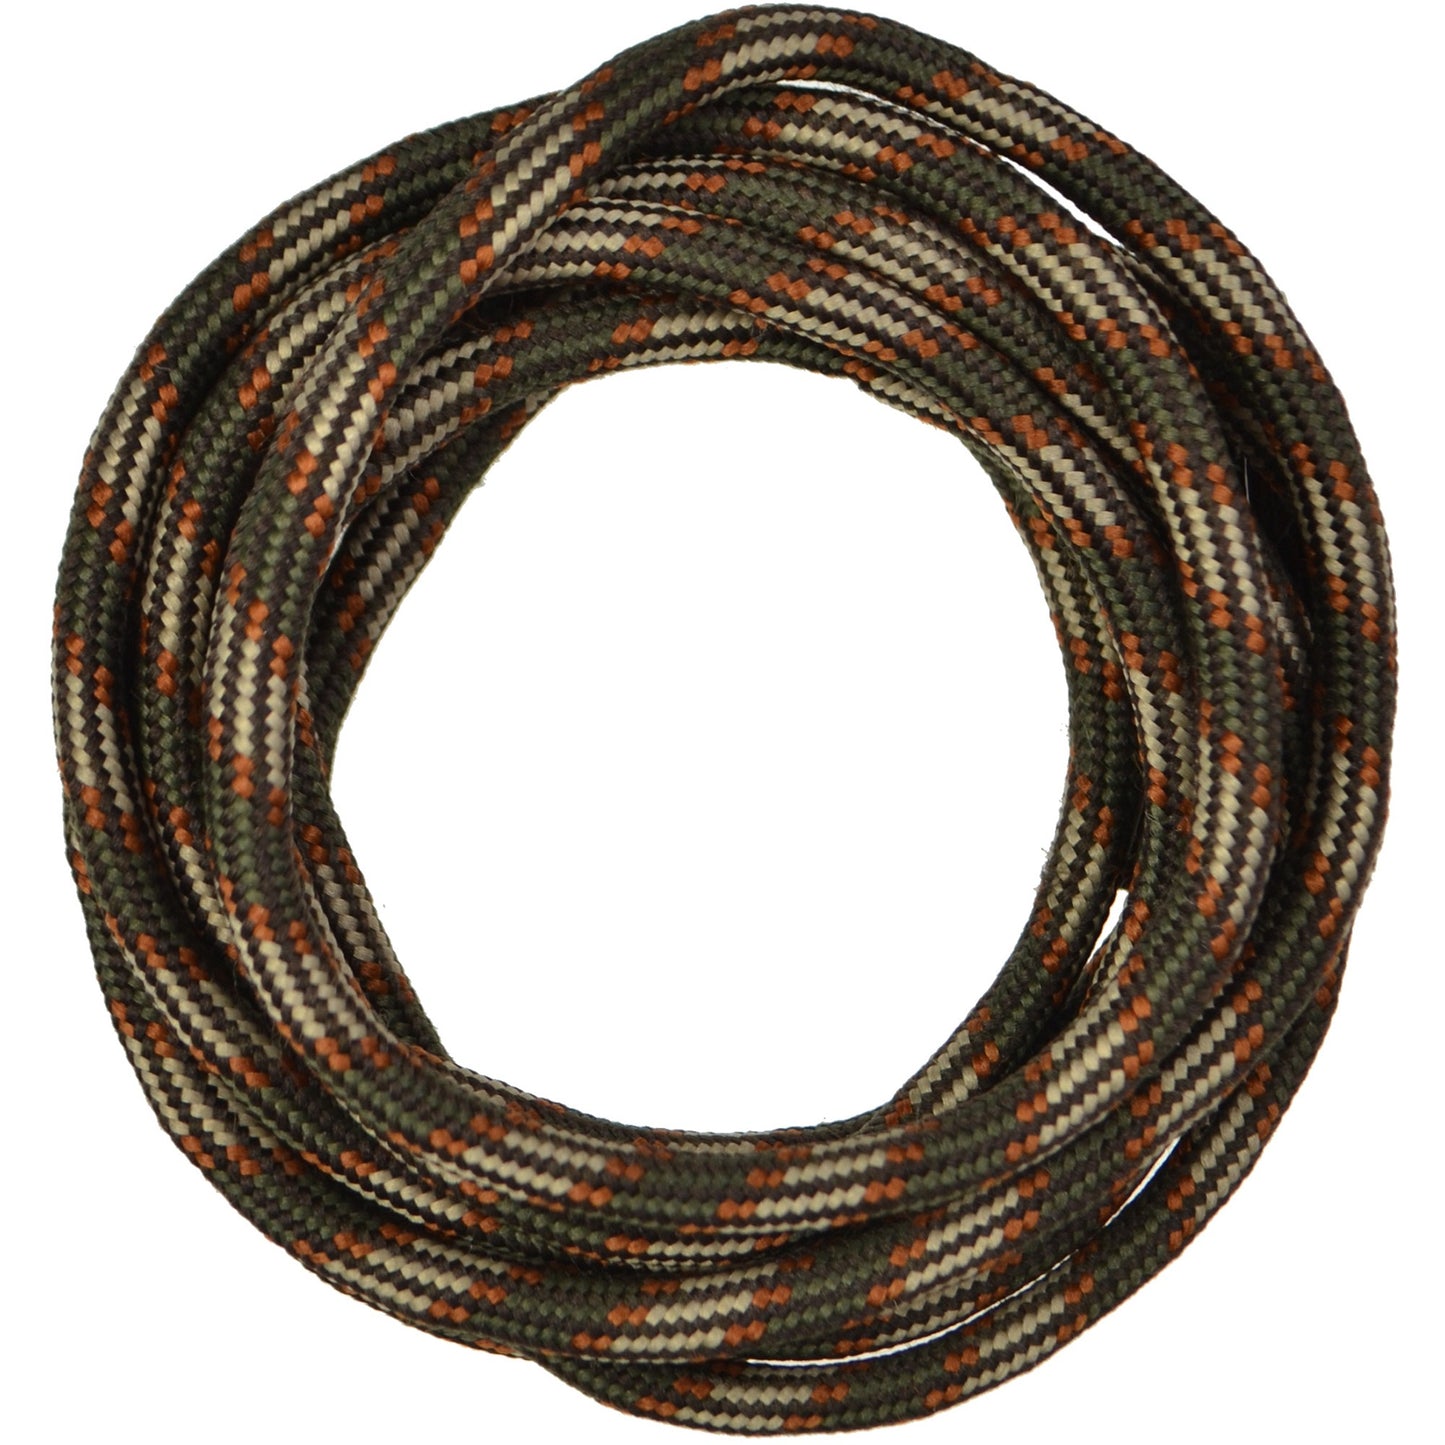 90cm Worksite Cord Work Boot Shoe Laces - Multi Brown